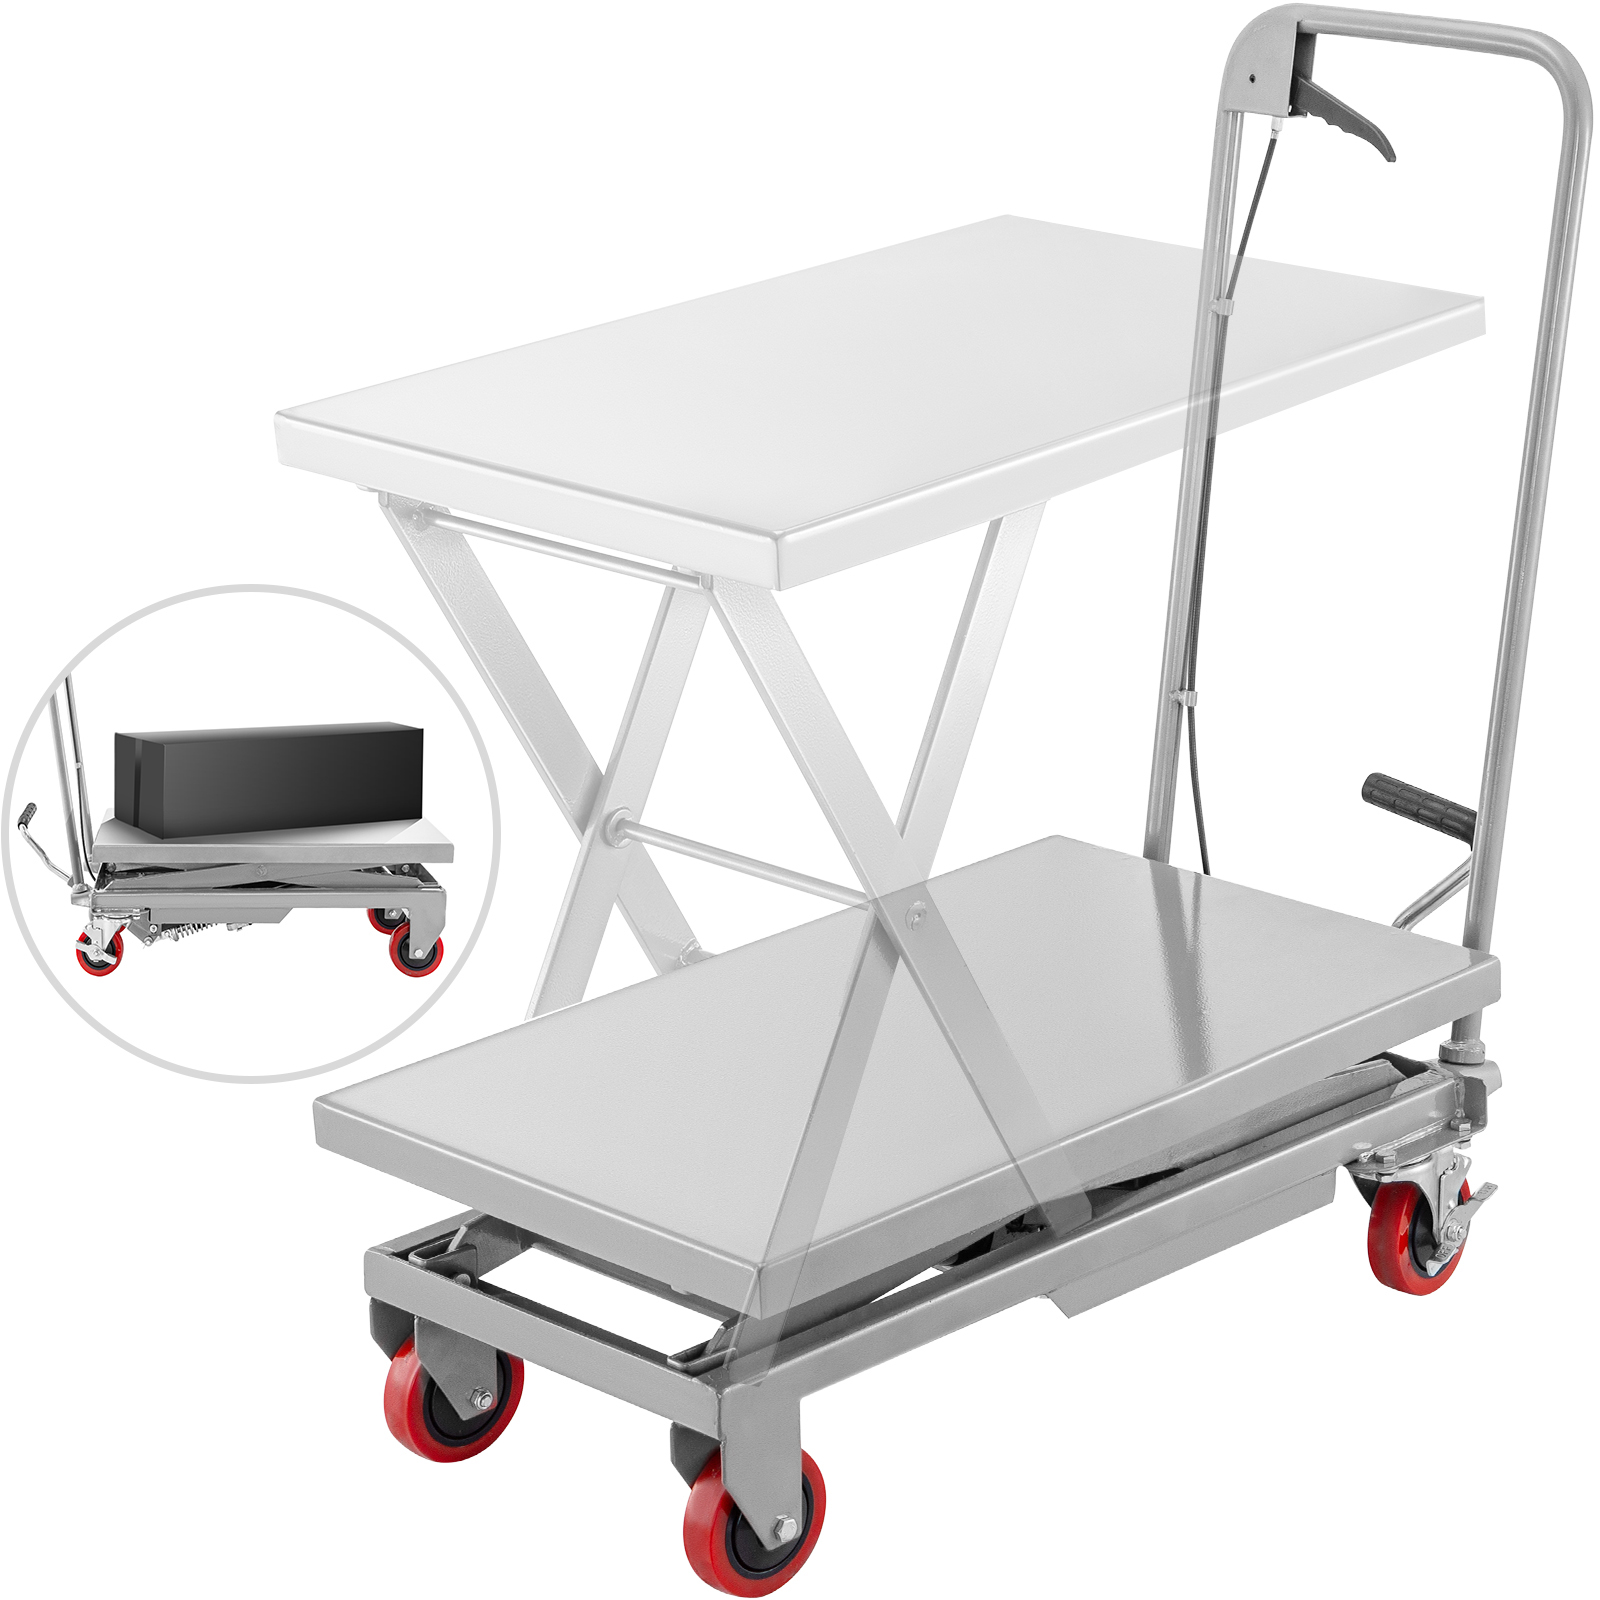 VEVOR Hydraulic Scissor 500LBS Capacity, Cart Lift Table Cart 28.5-Inch  Lifting Height, Manual Scissor Lift Table w/ Wheels and Foot Pump,  Elevating Hydraulic Cart for Material Handling, in Grey VEVOR CA